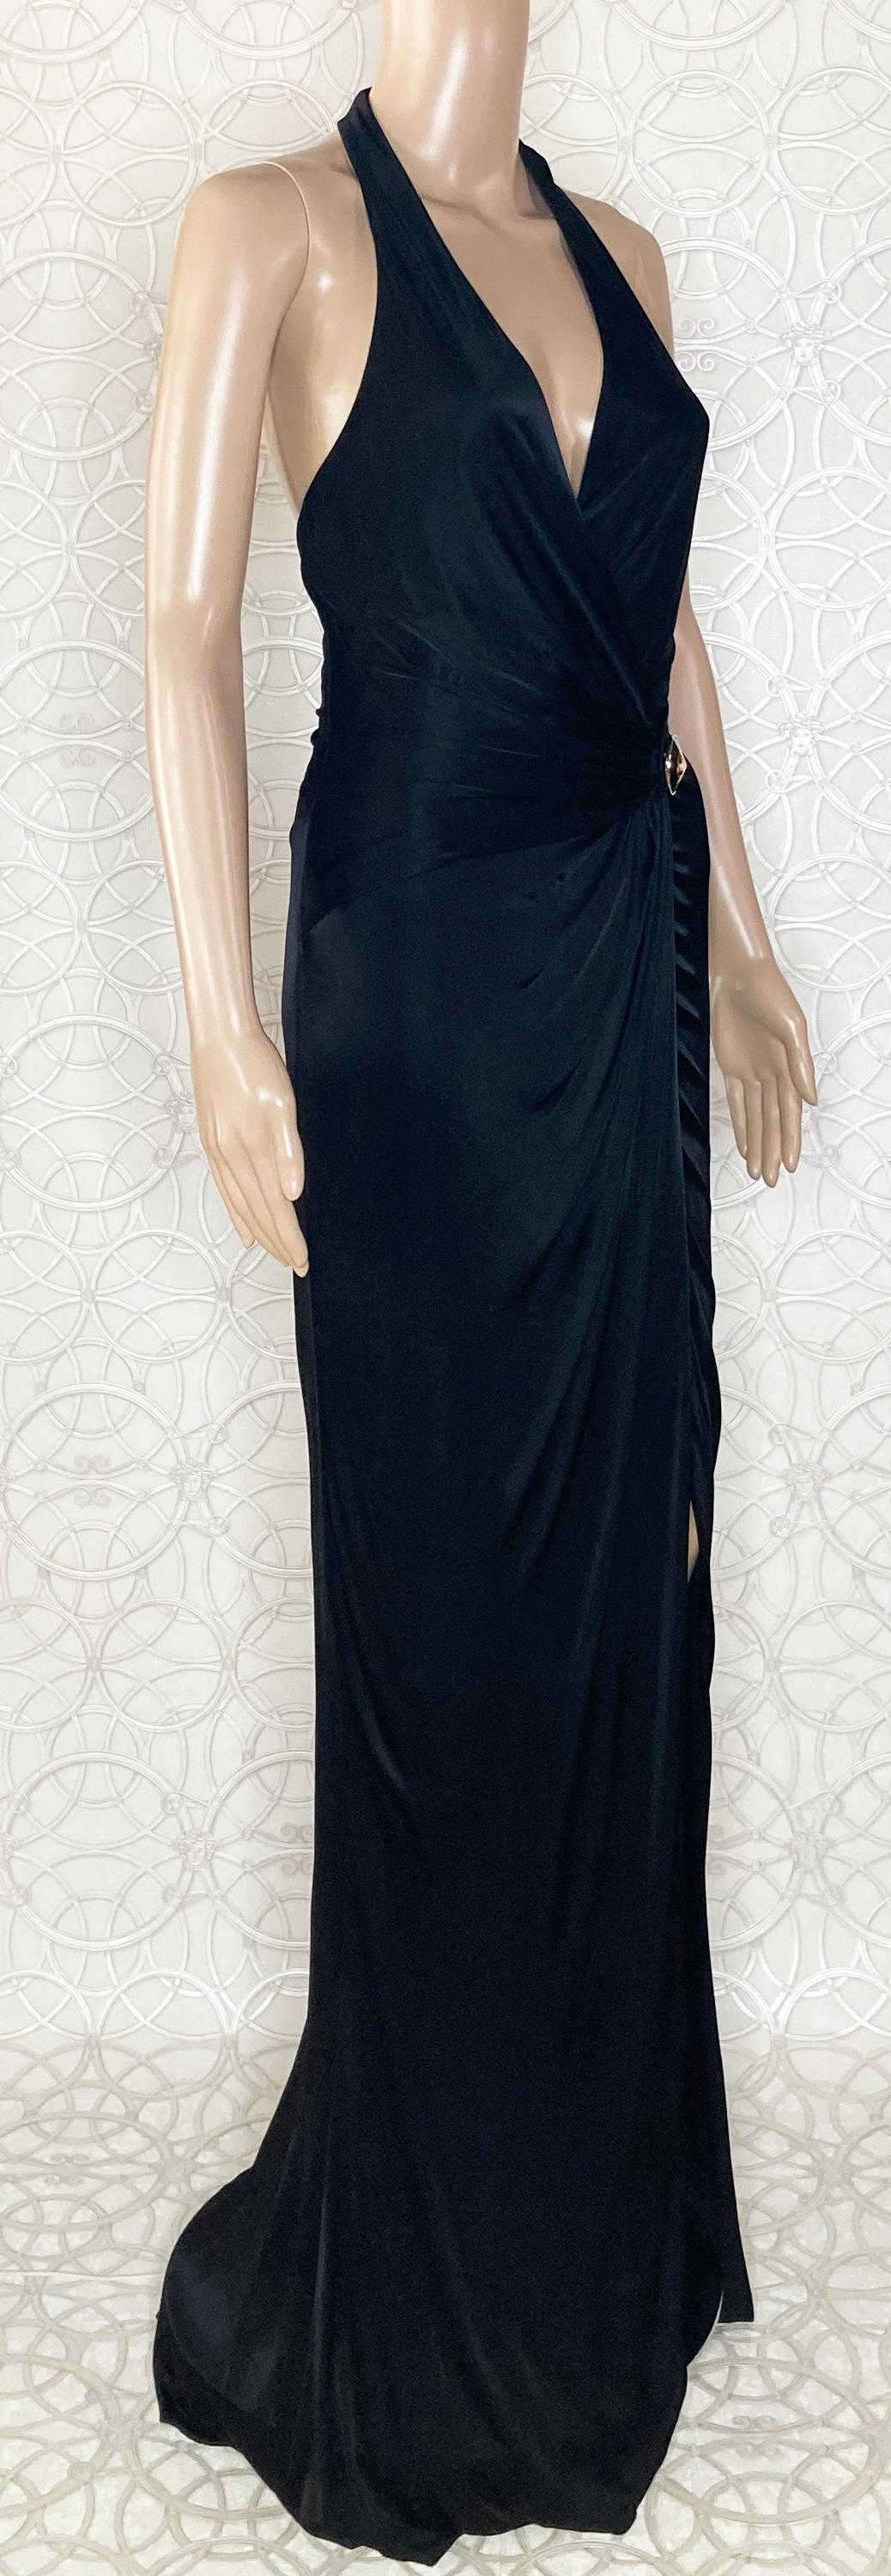 VERSACE BLACK VISCOSE LONG GOWN DRESS with OPEN BACK 42 - 6 For Sale 8